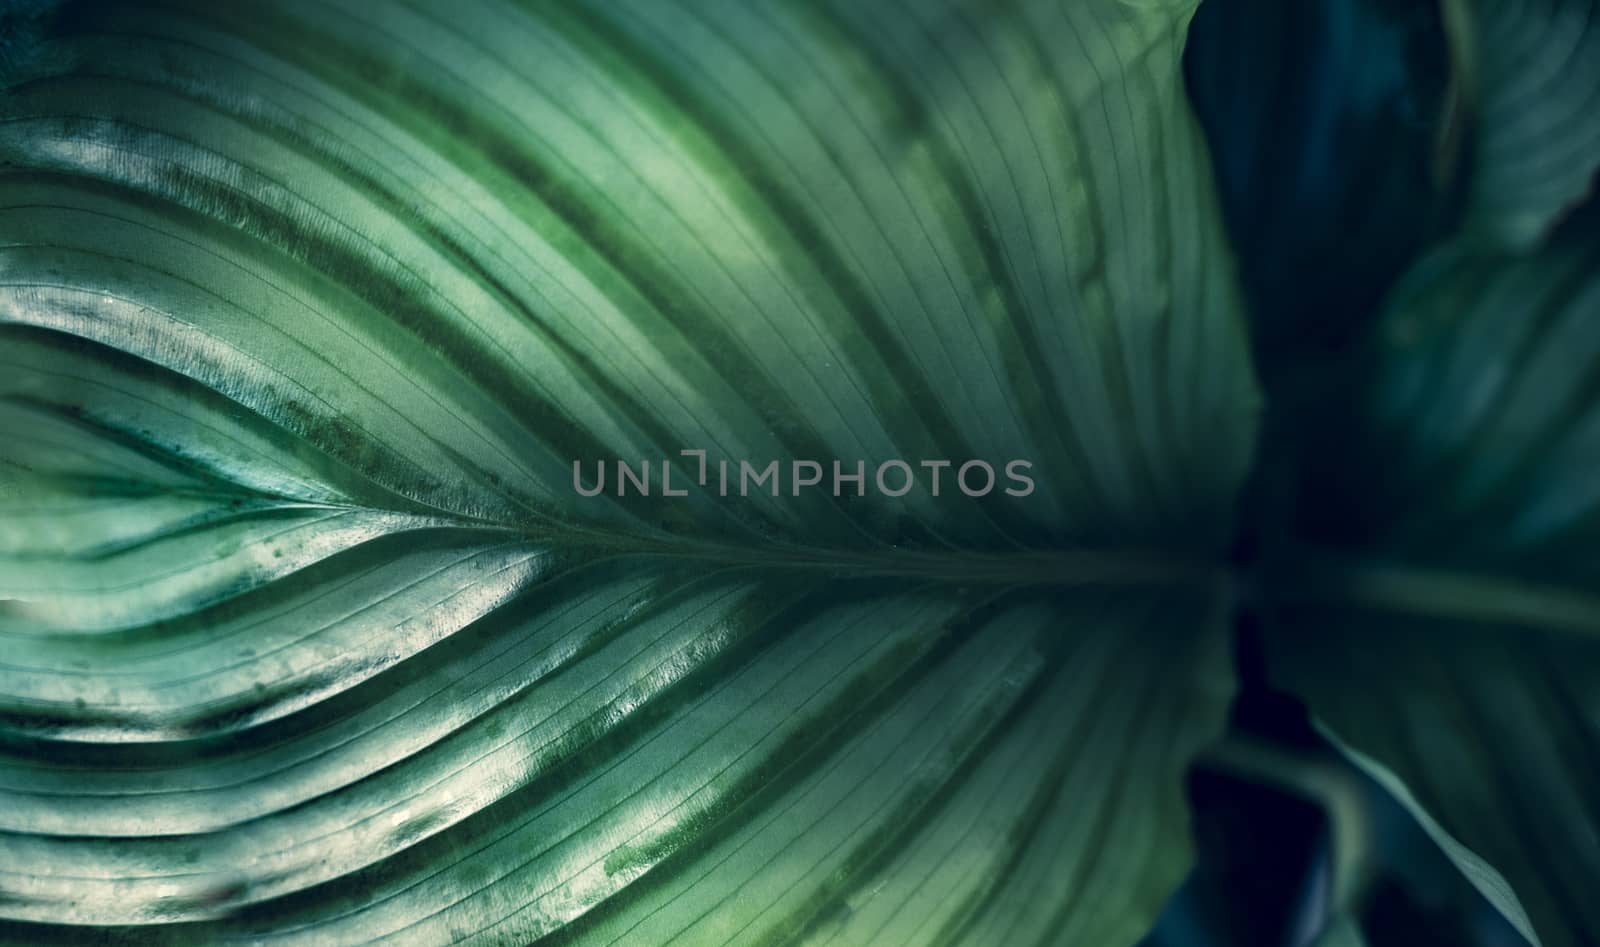 tropical leaves colorful flower on dark tropical foliage nature background dark green foliage nature by sarayut_thaneerat